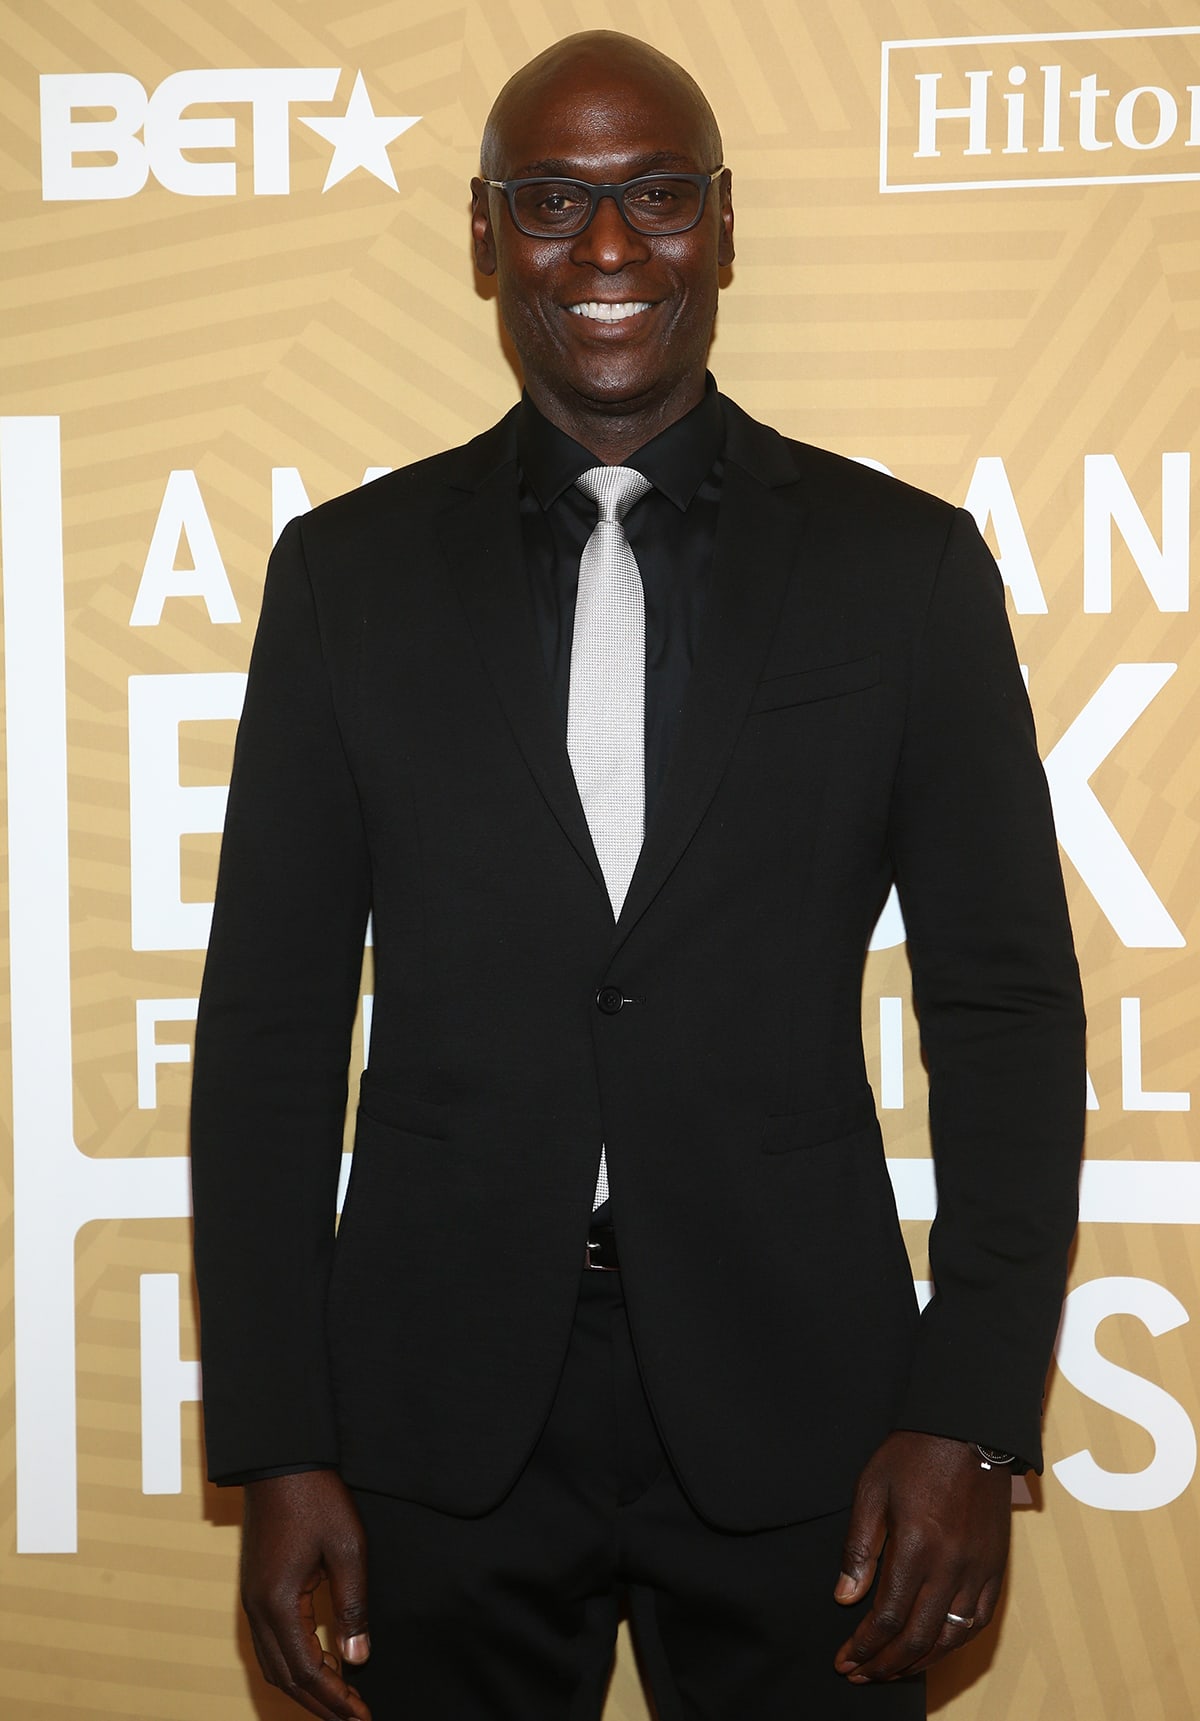 Lance Reddick was an American actor and musician, who passed away at the age of 60